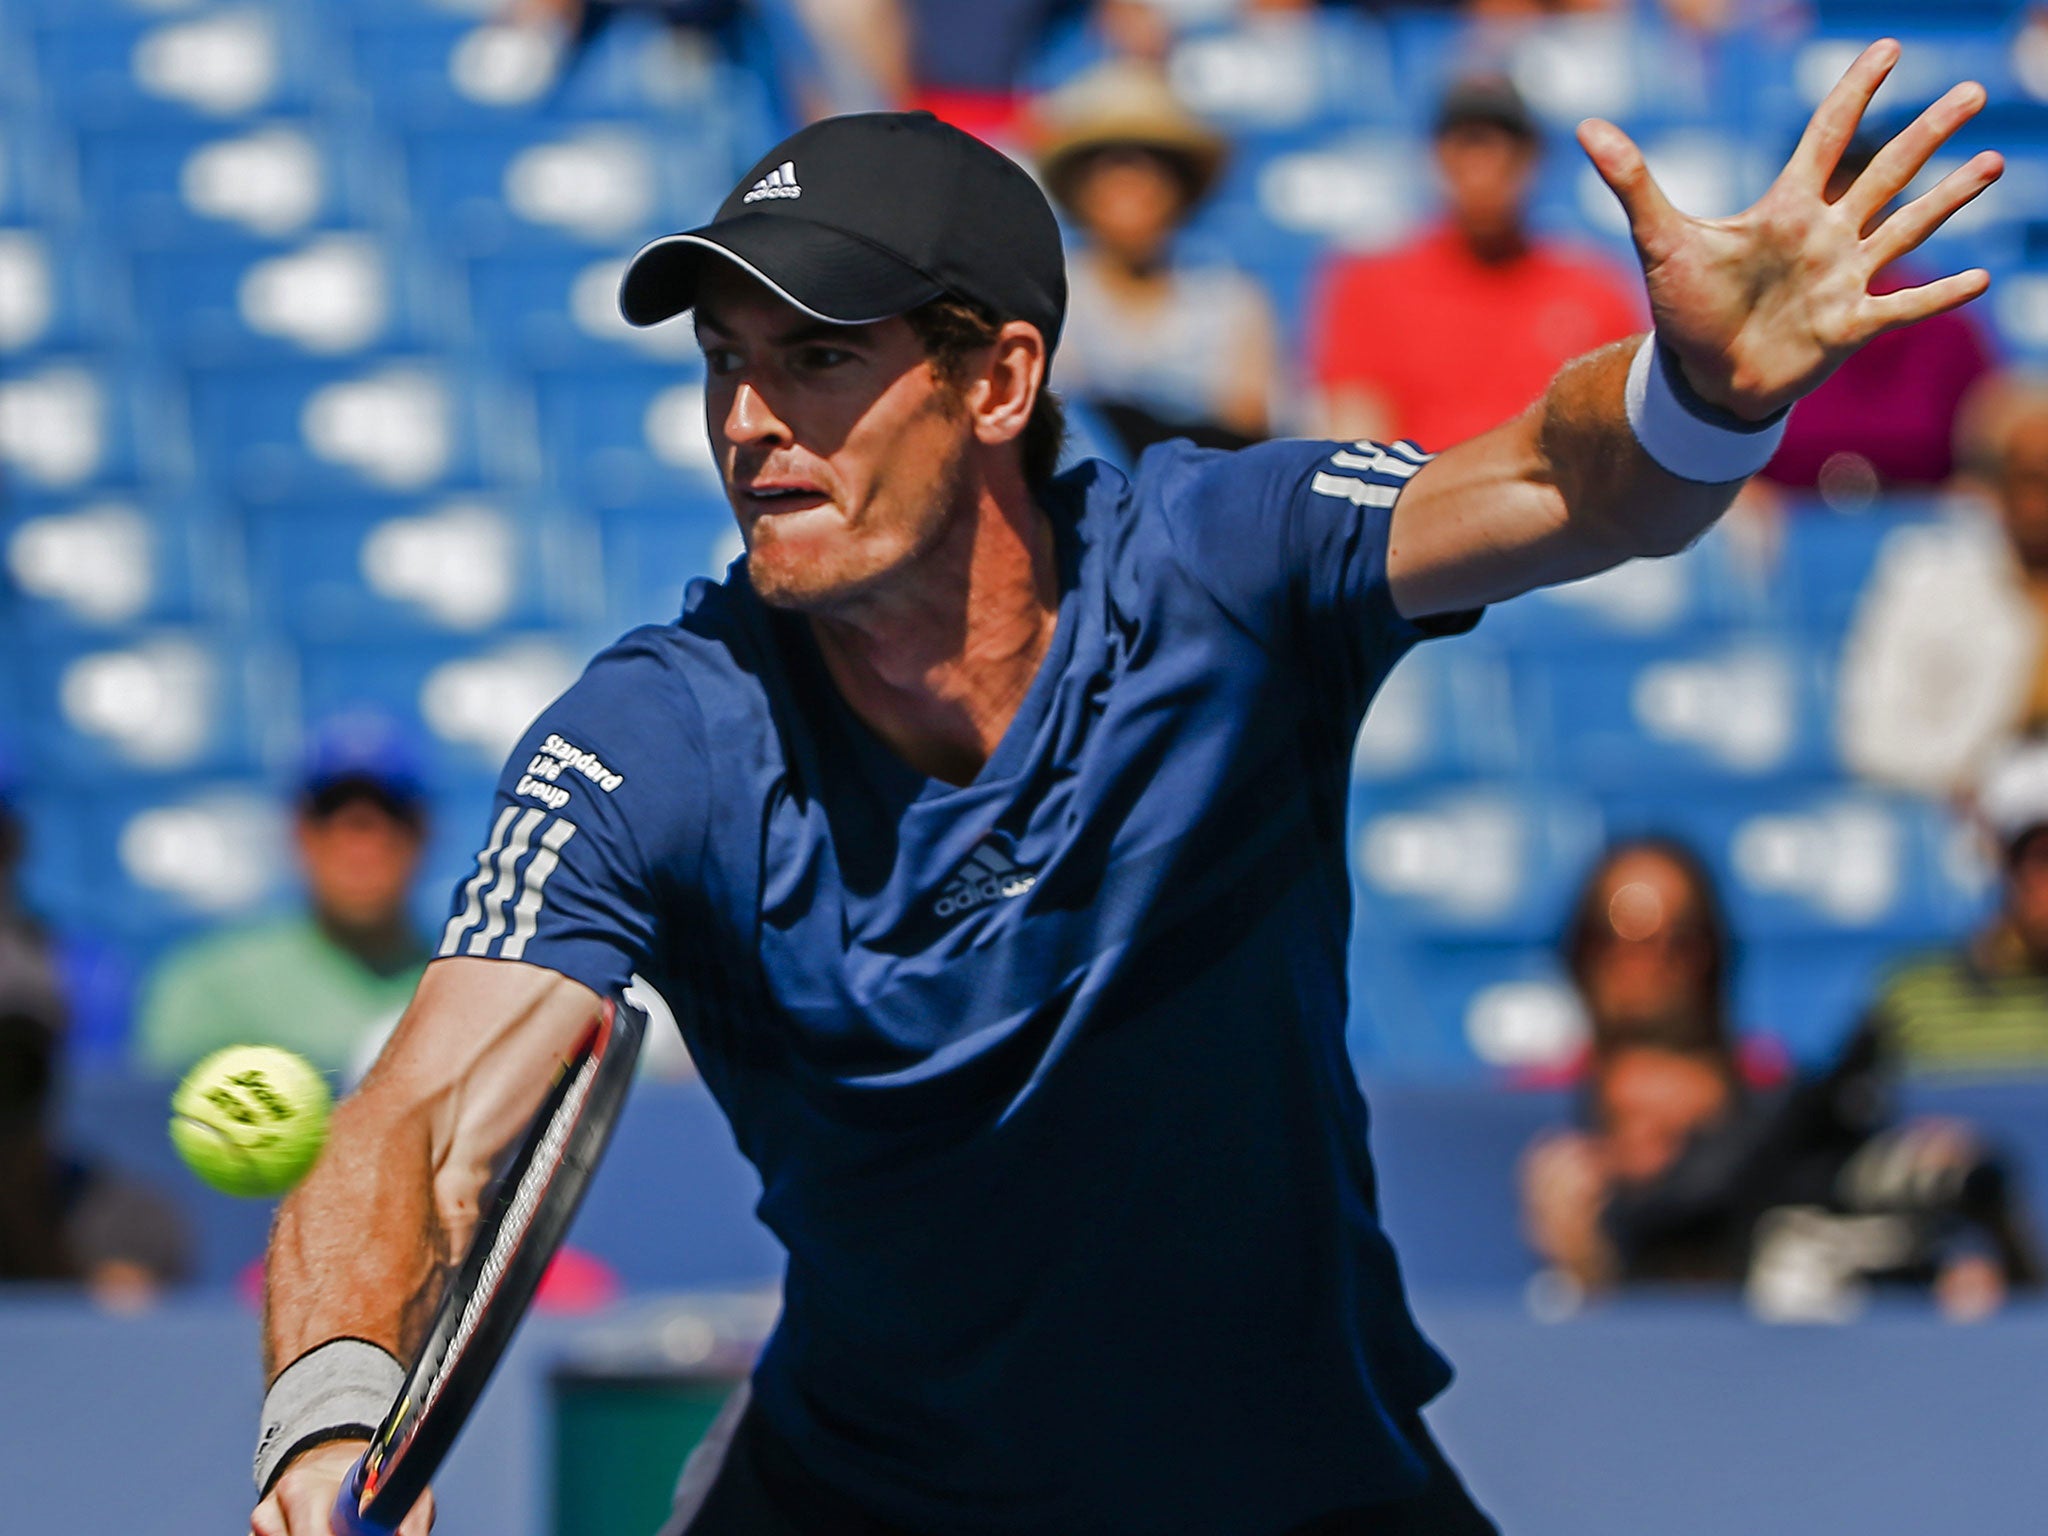 Andy Murray hits a backhand on his way to victory over
Joao Sousa